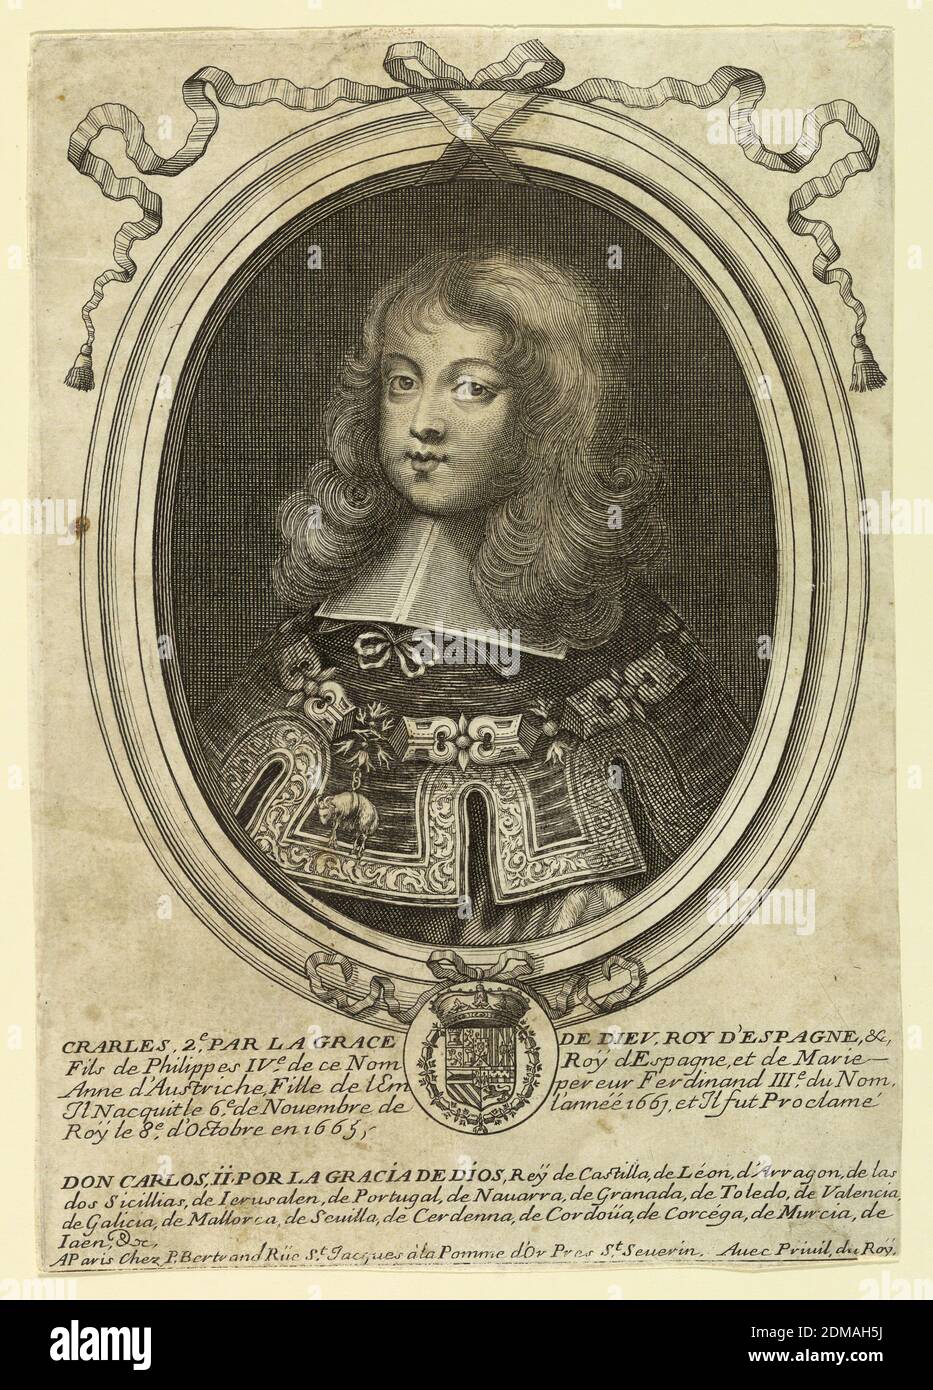 Portrait of Charles II of Spain (1661-1700), Engraving on paper, Charles II as a young boy of about six years of age at the time he was proclaimed king. The handsome boy with long blond hair is depicted in three-quarter view to left. He wears the royal robe with the order of Toison d'or; his name inscribed on the frame, below., France, 1665-1670, Print Stock Photo